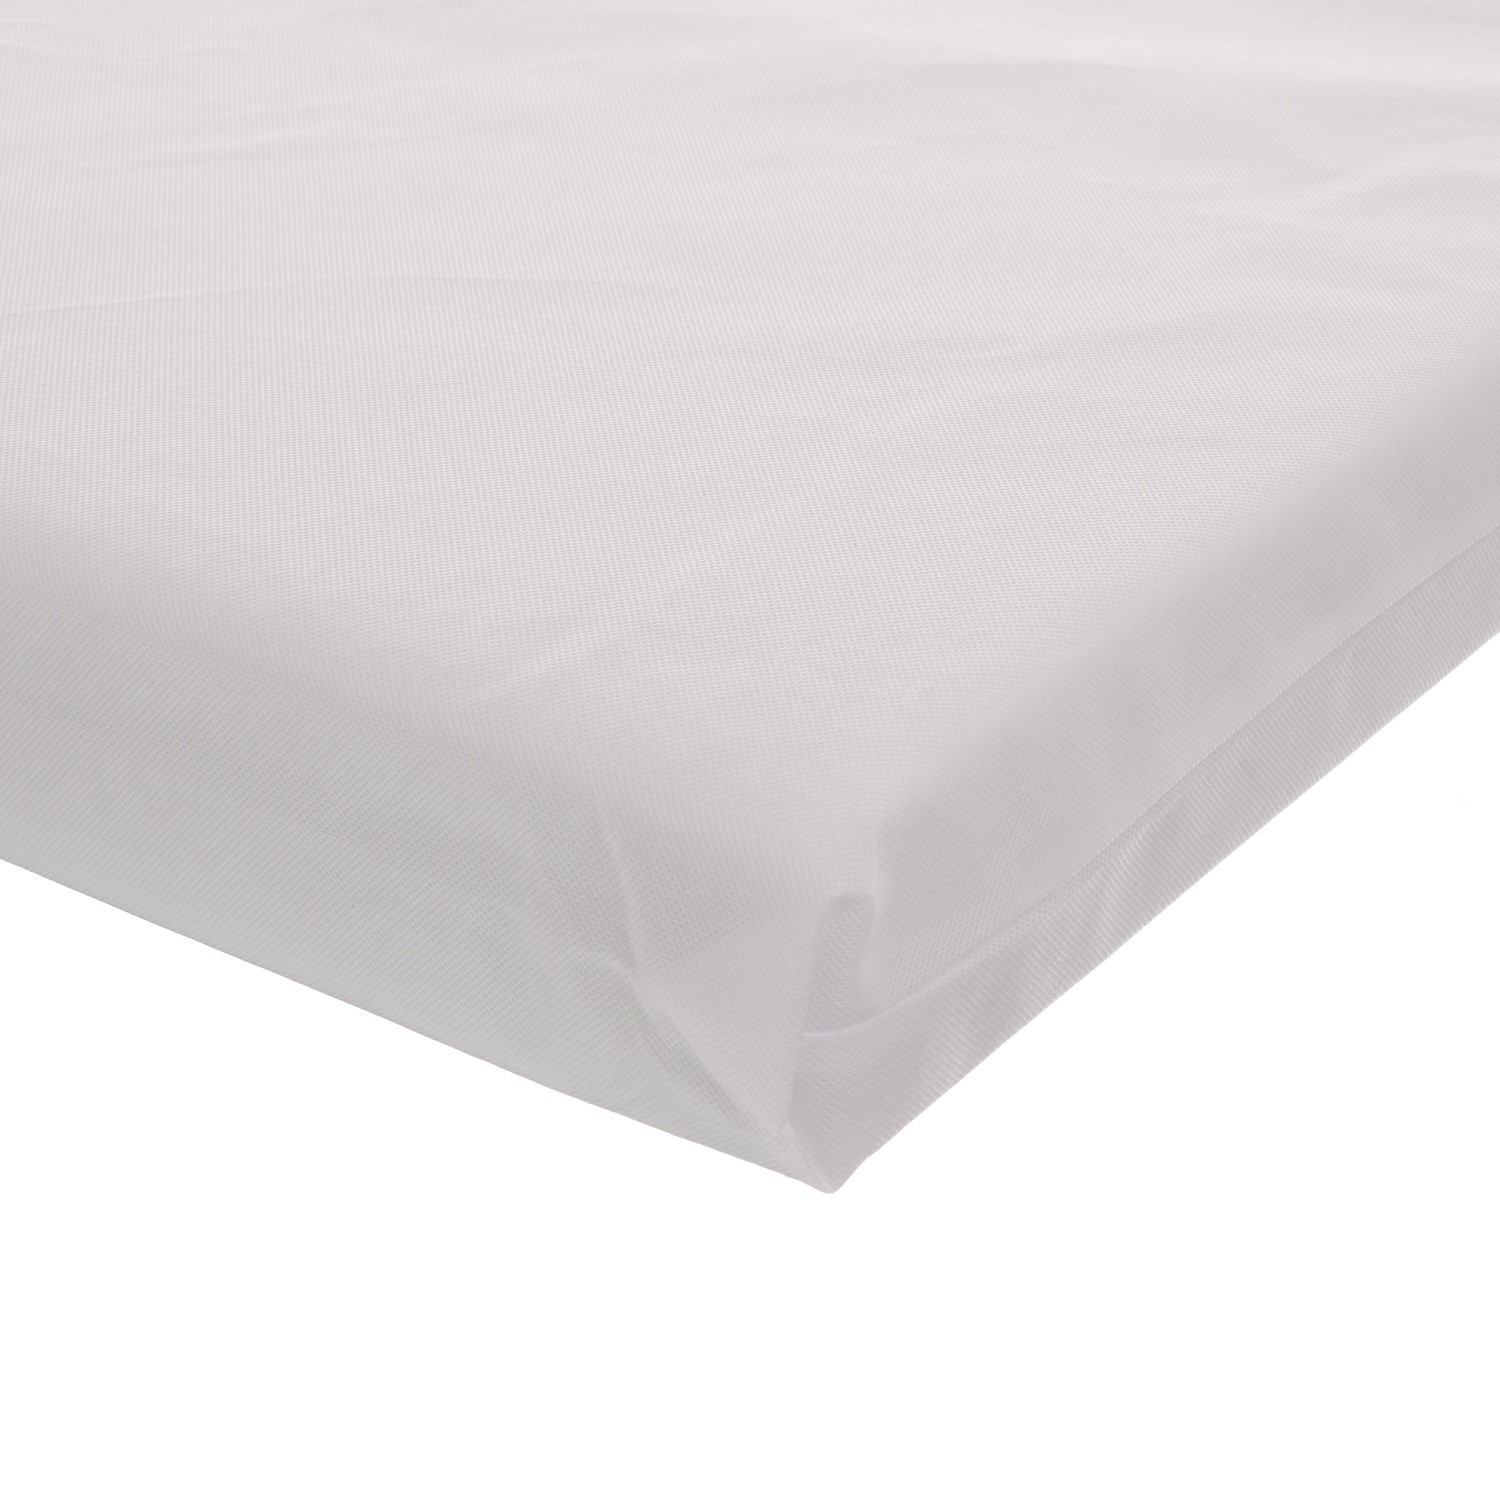 Photo of Hypoallergenic breathable fibre cot bed mattress - 120cm x 60cm - obaby